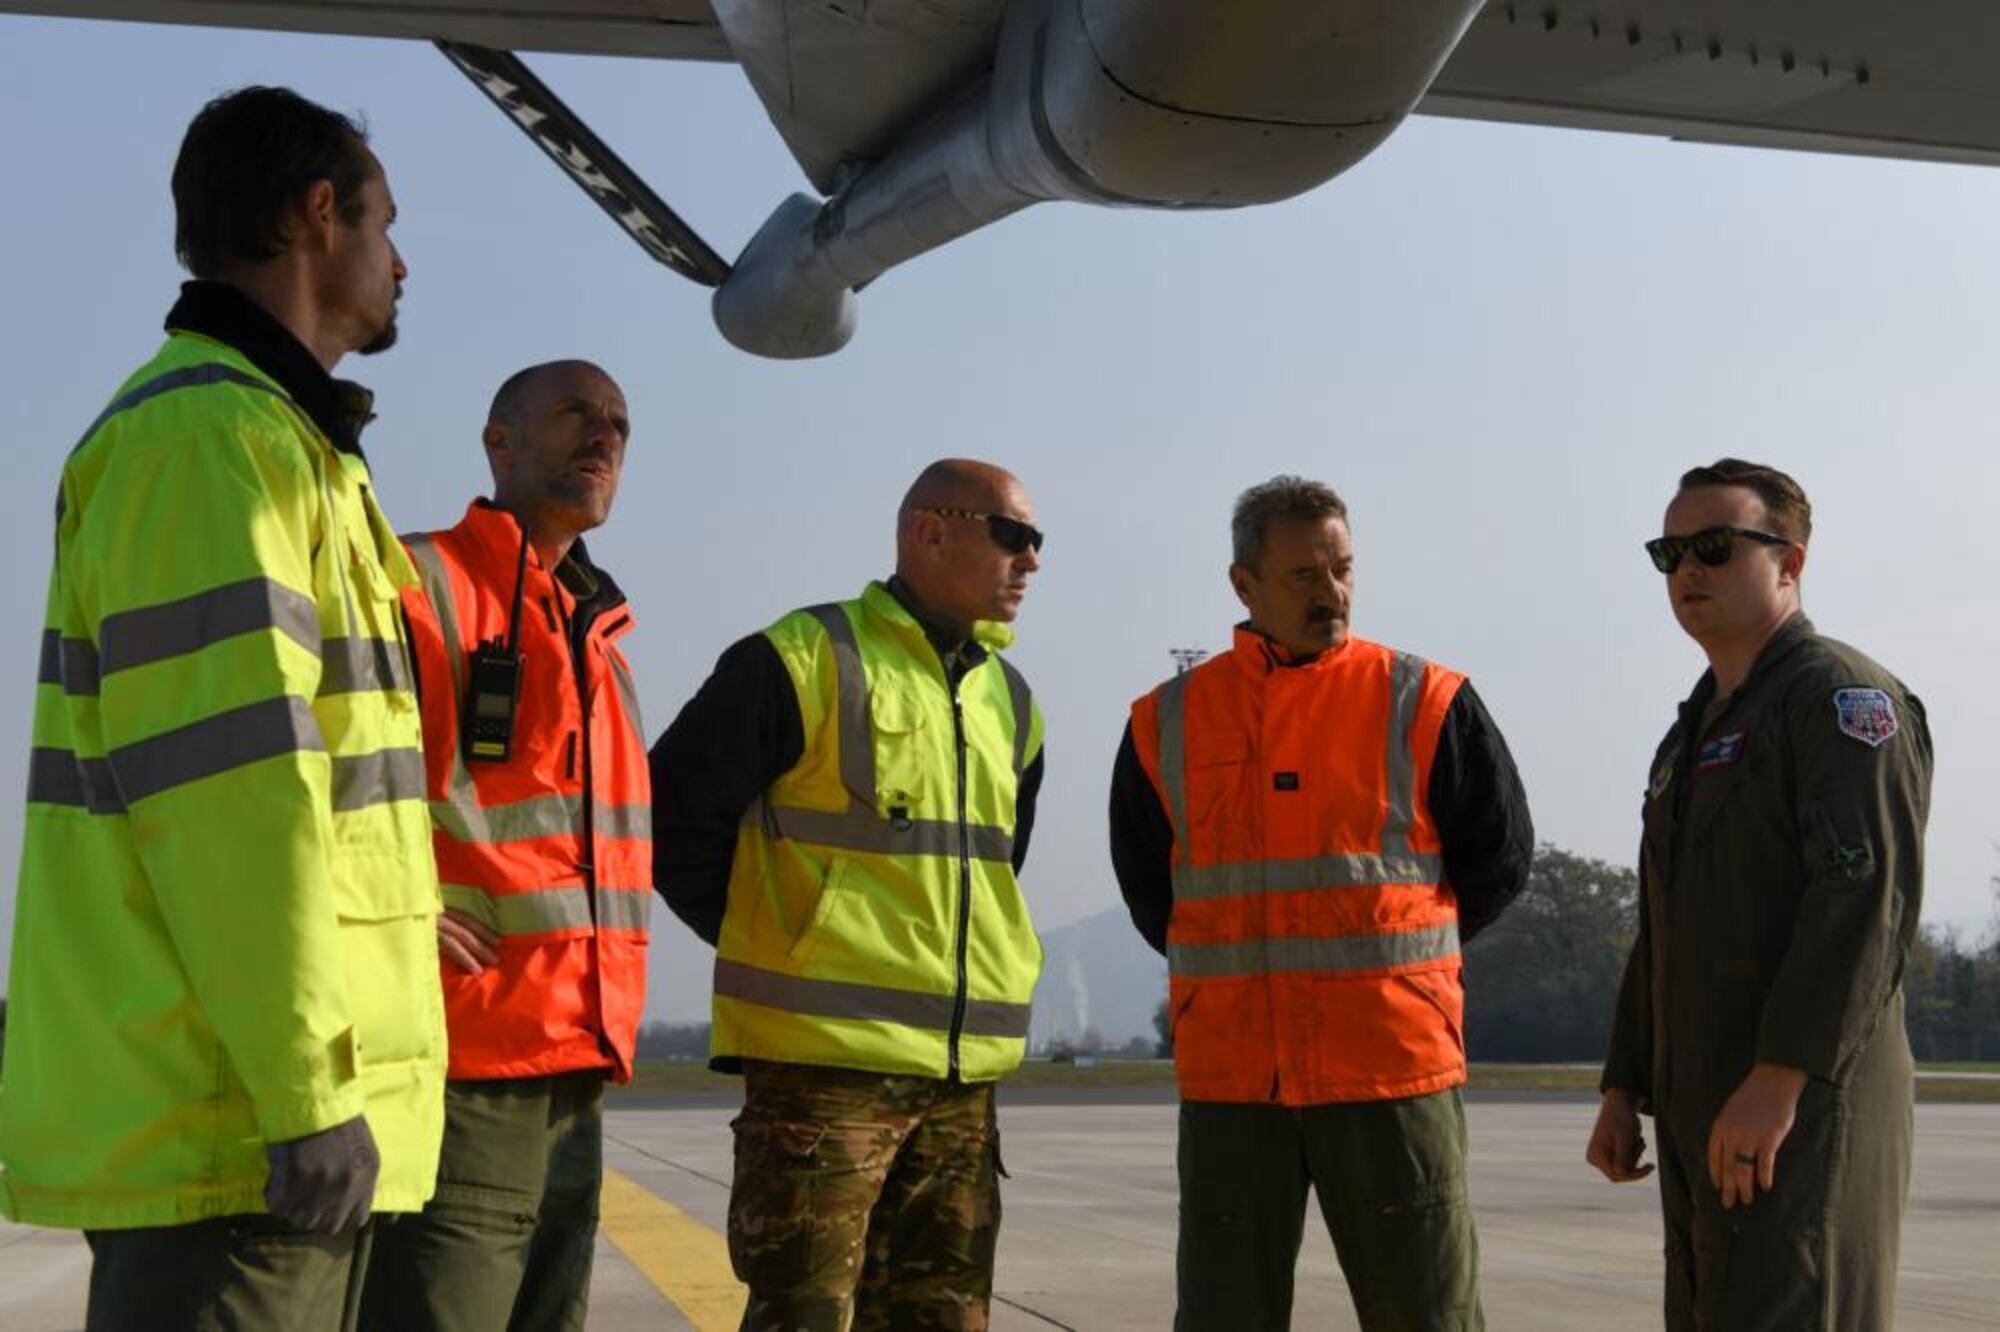 U.S. Air Force Tech. Sgt. Blake Soule, 100th Air Refueling Squadron boom operator, discusses the use of a KC-135 Stratotanker’s boom in refueling operations with Slovenian military officials at Cerklje, Slovenia, Oct. 29, 2021. As part of the KC-135 Stratotanker aircraft tour, Slovenian military officials were given the chance to sit in the boom pod getting a firsthand experience of the boom operators perspective. (U.S. Air Force photo by Senior Airman Nicholas Swift)